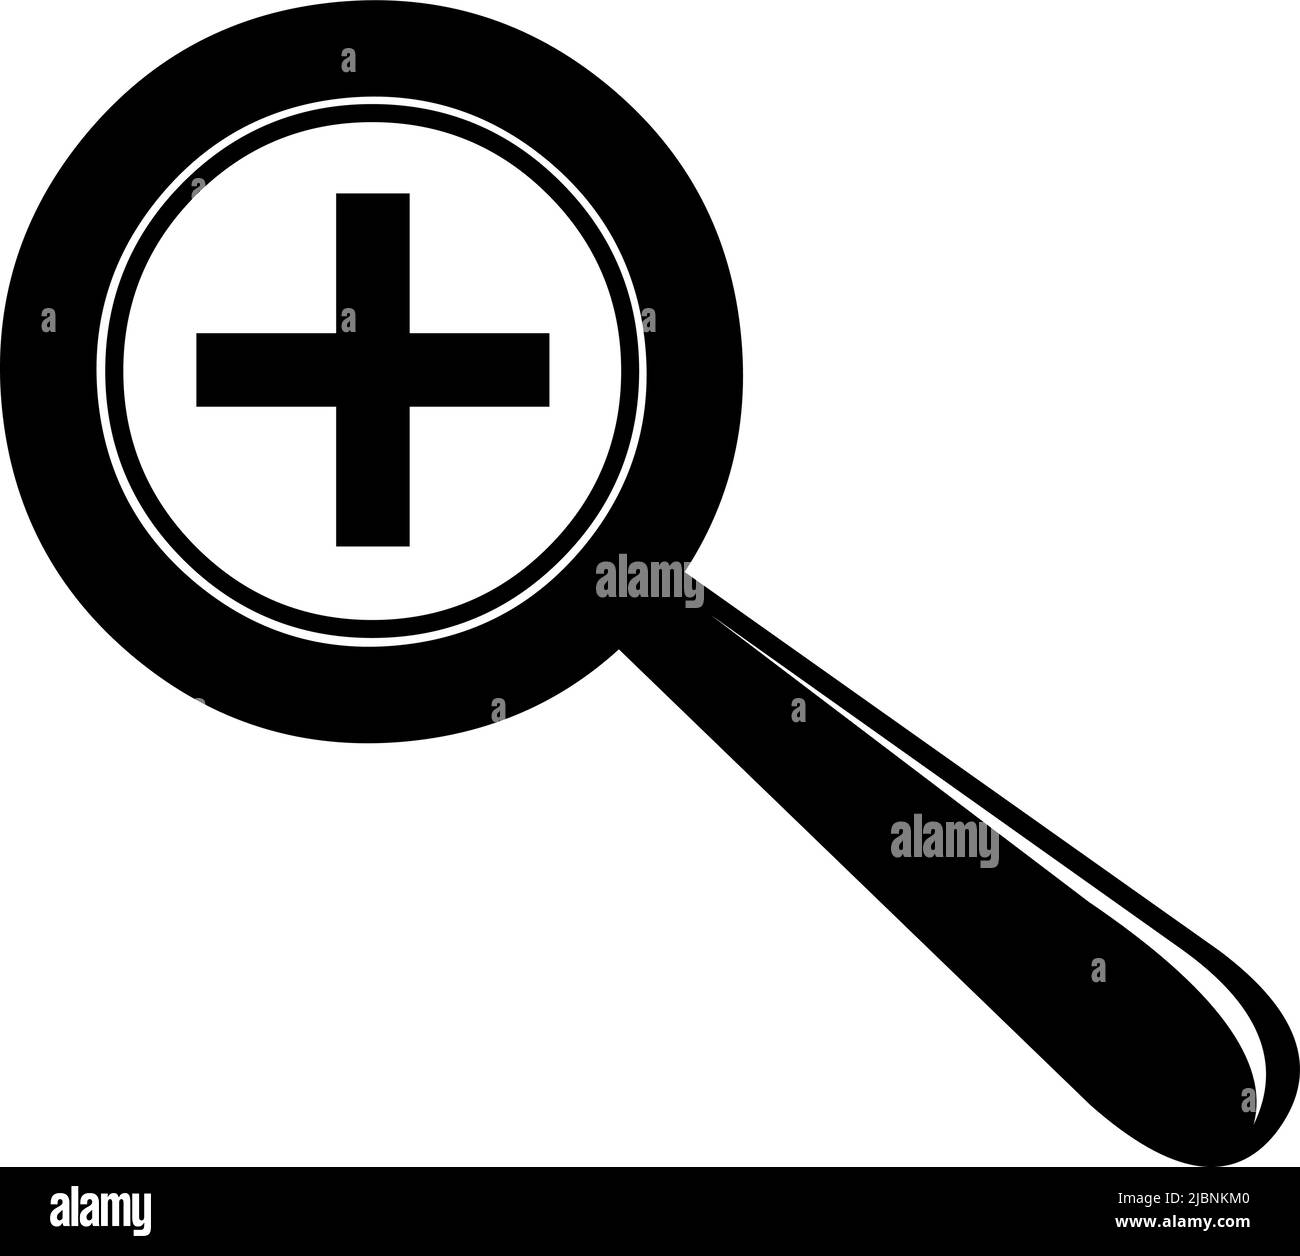 Vector icon illustration of a magnifying glass with the plus symbol for increase or zoom in Stock Vector